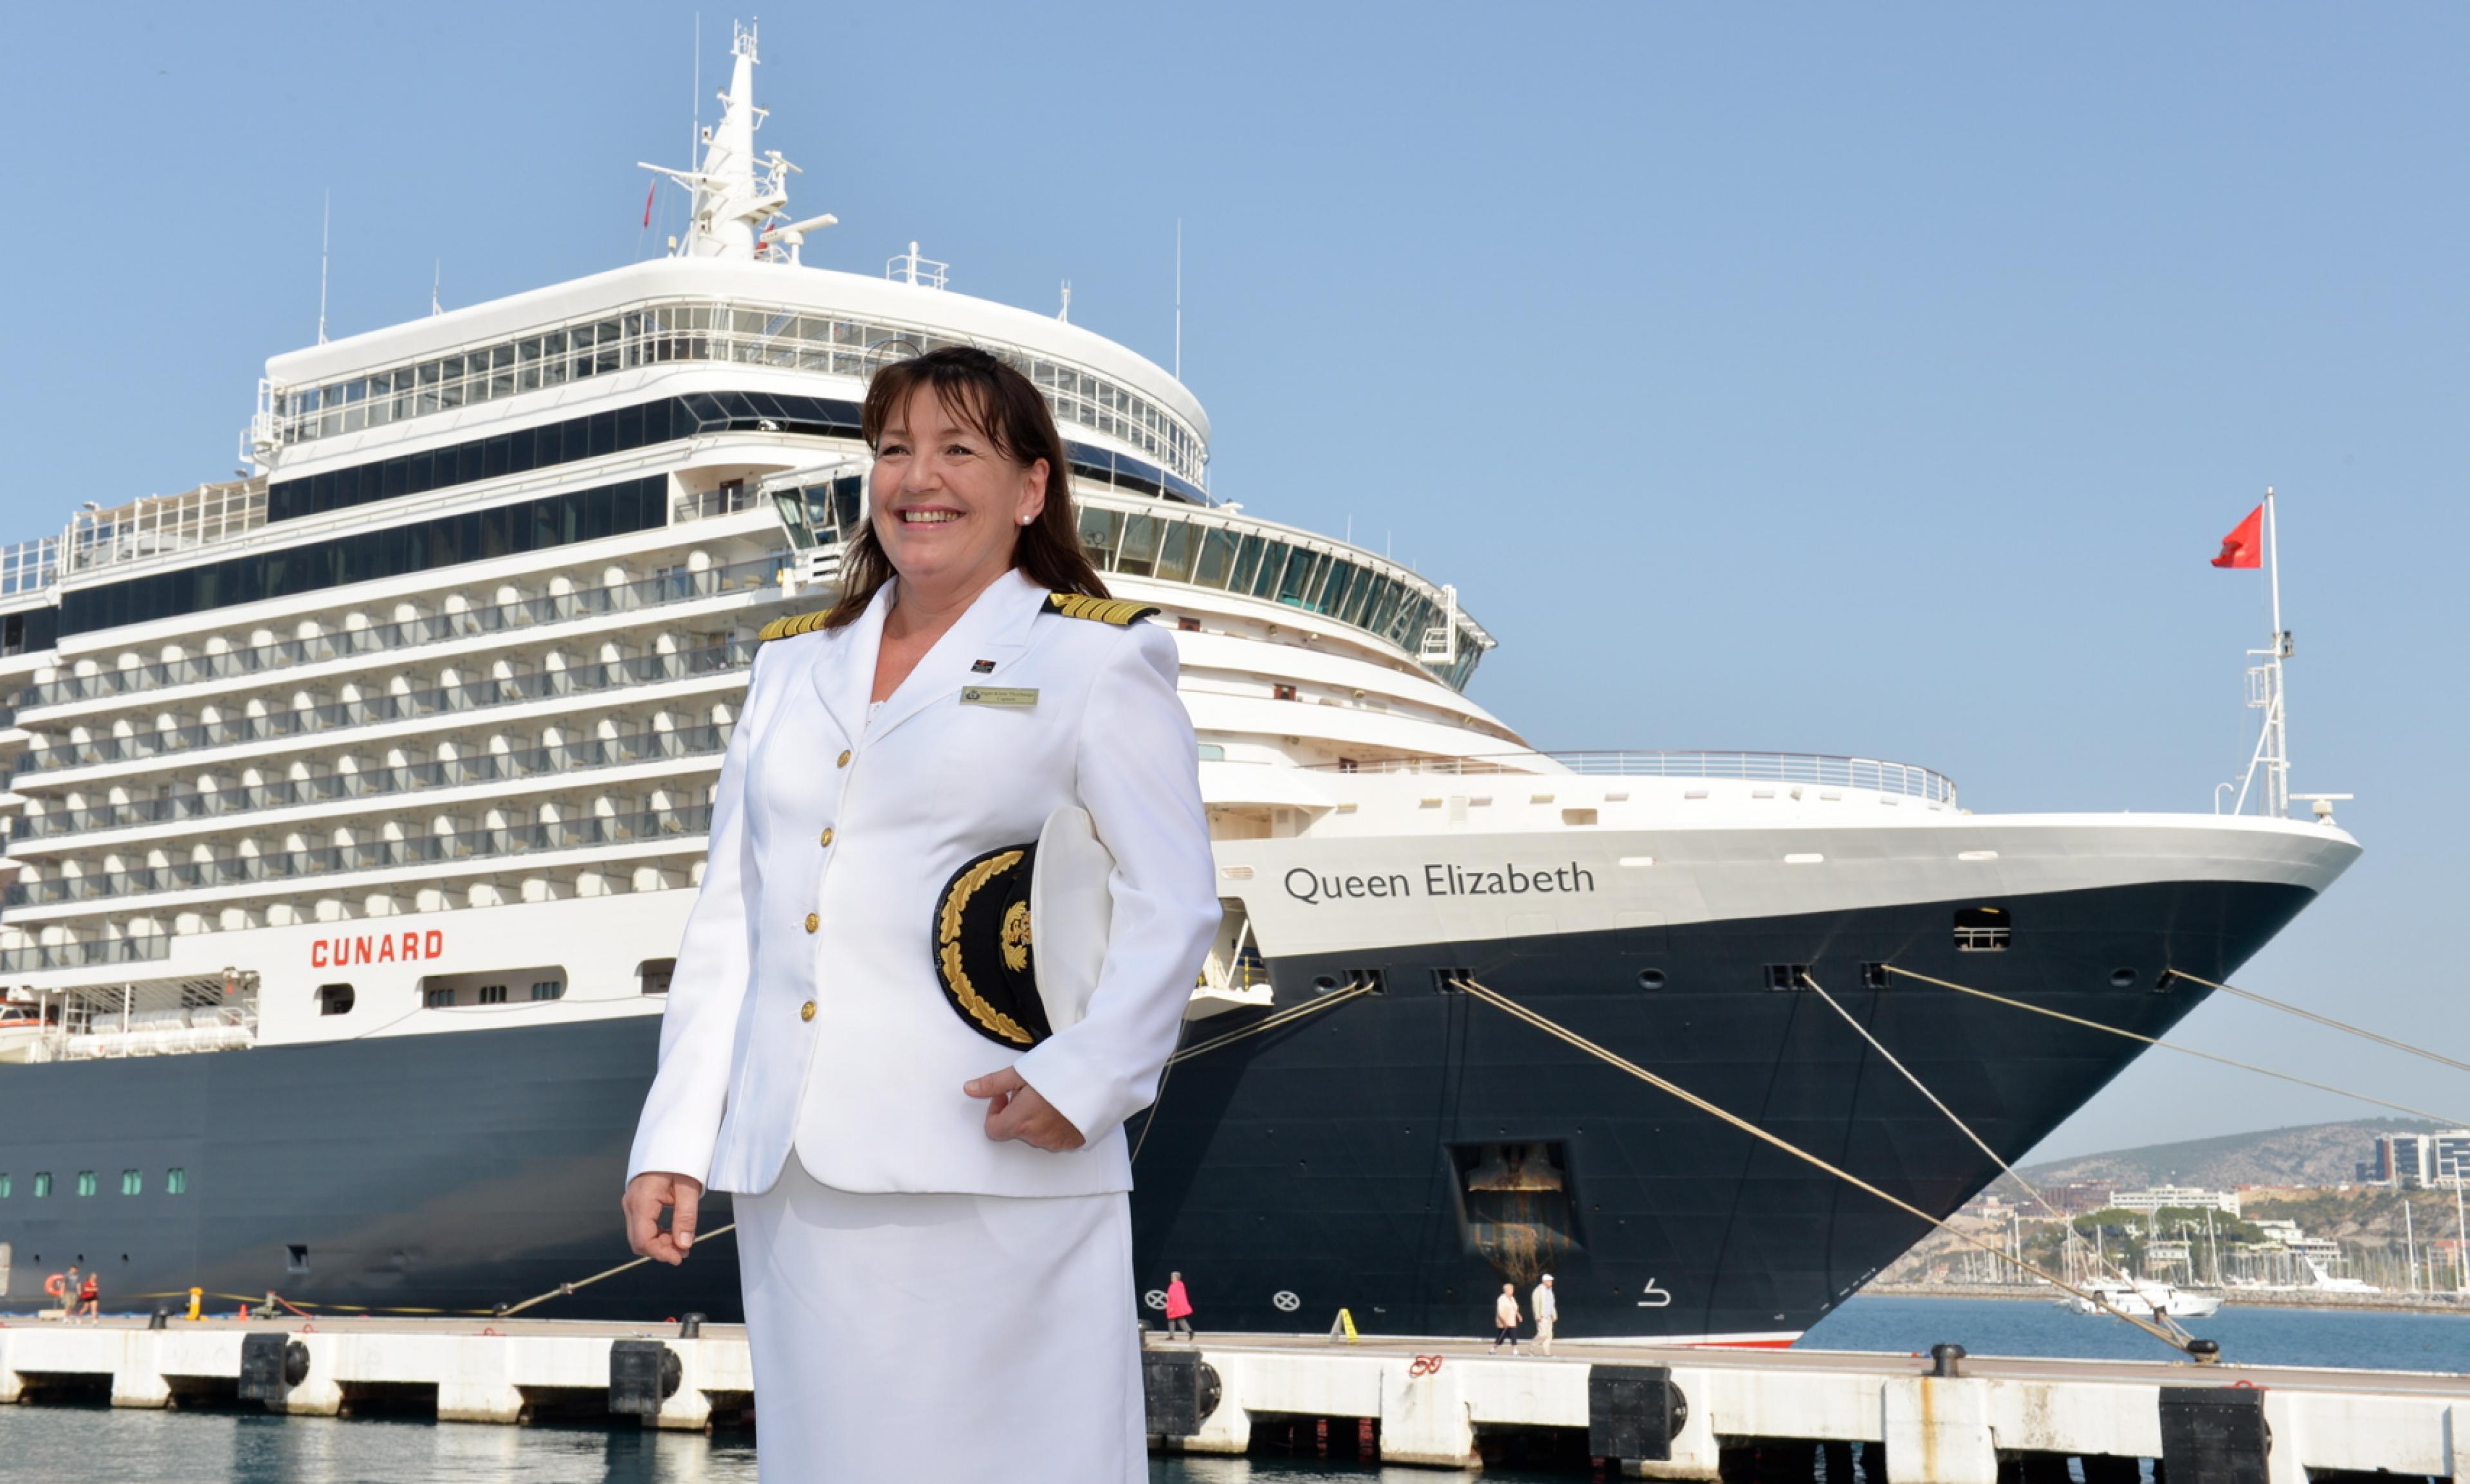 Captain Thorhauge standing in front of Queen Elizabeth cruise ship of the British Cruise Line Cunard